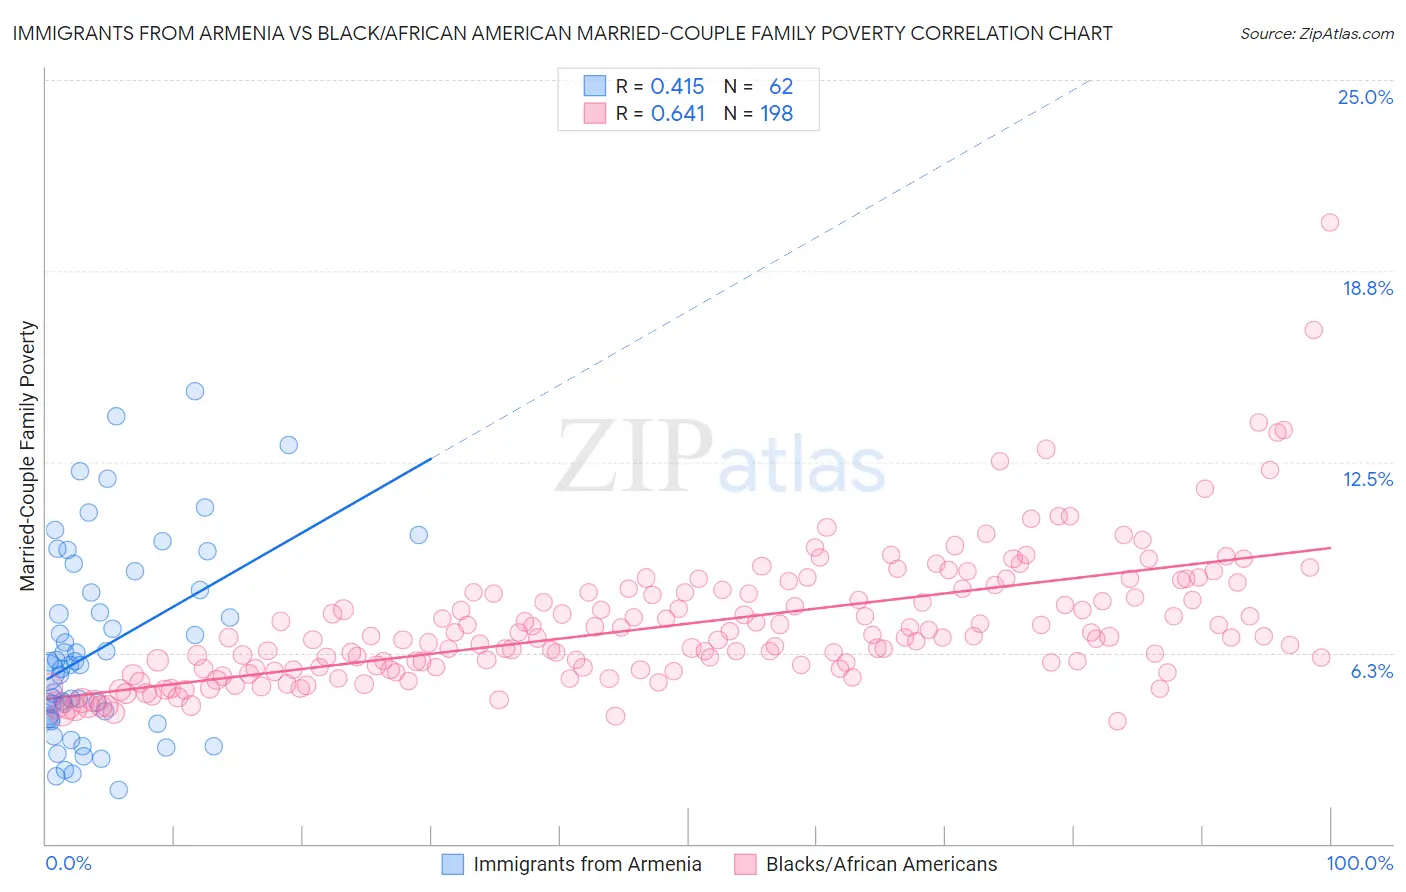 Immigrants from Armenia vs Black/African American Married-Couple Family Poverty